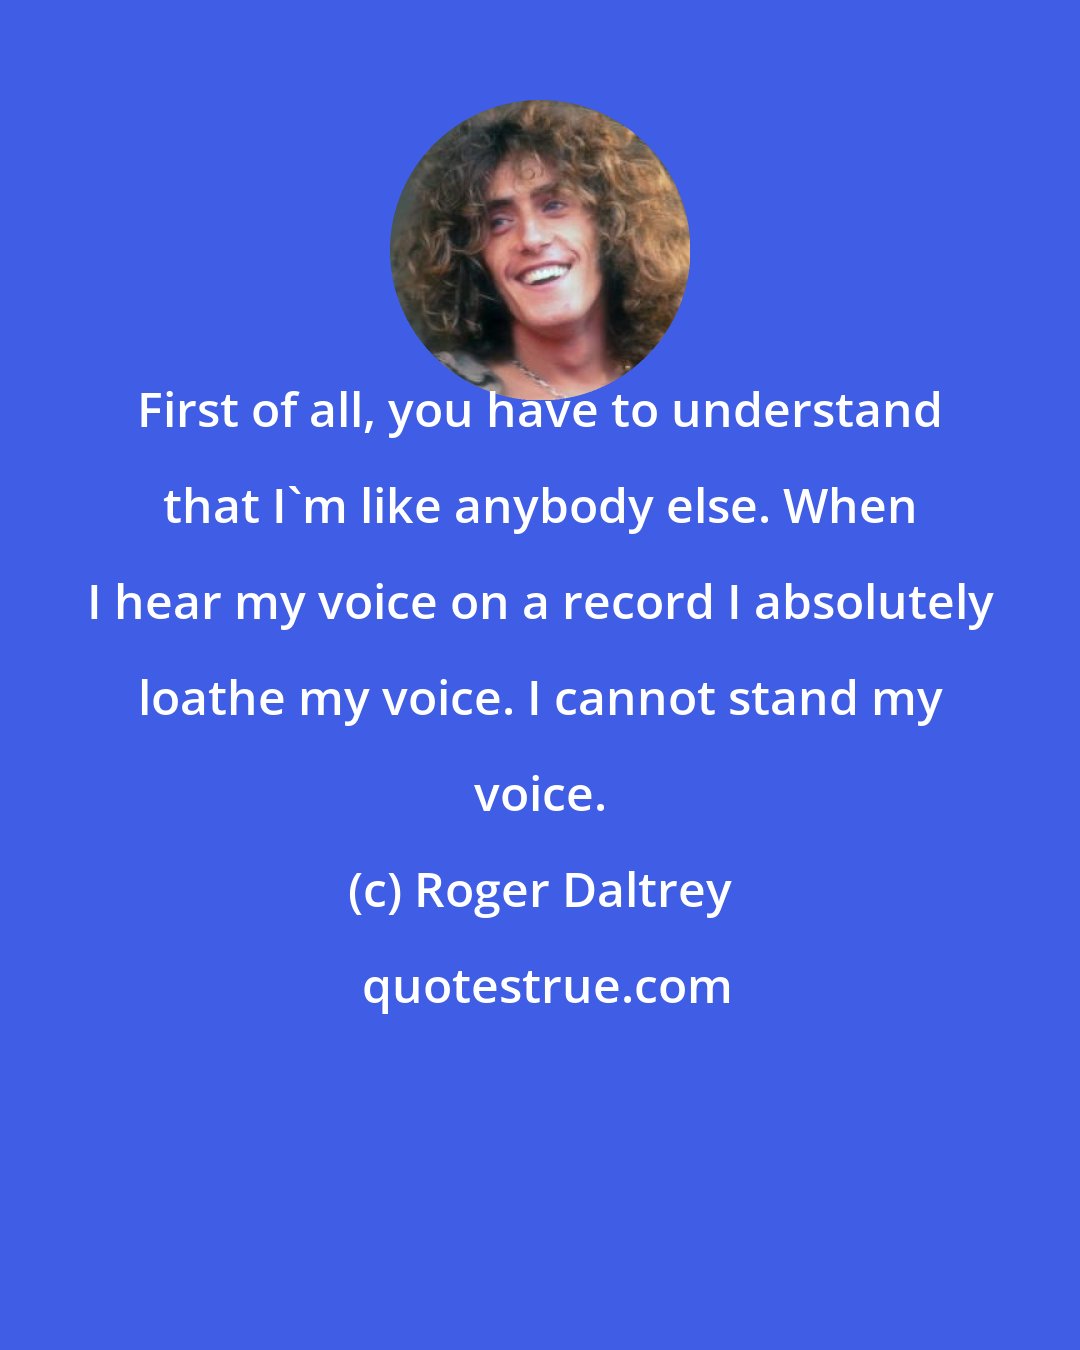 Roger Daltrey: First of all, you have to understand that I'm like anybody else. When I hear my voice on a record I absolutely loathe my voice. I cannot stand my voice.